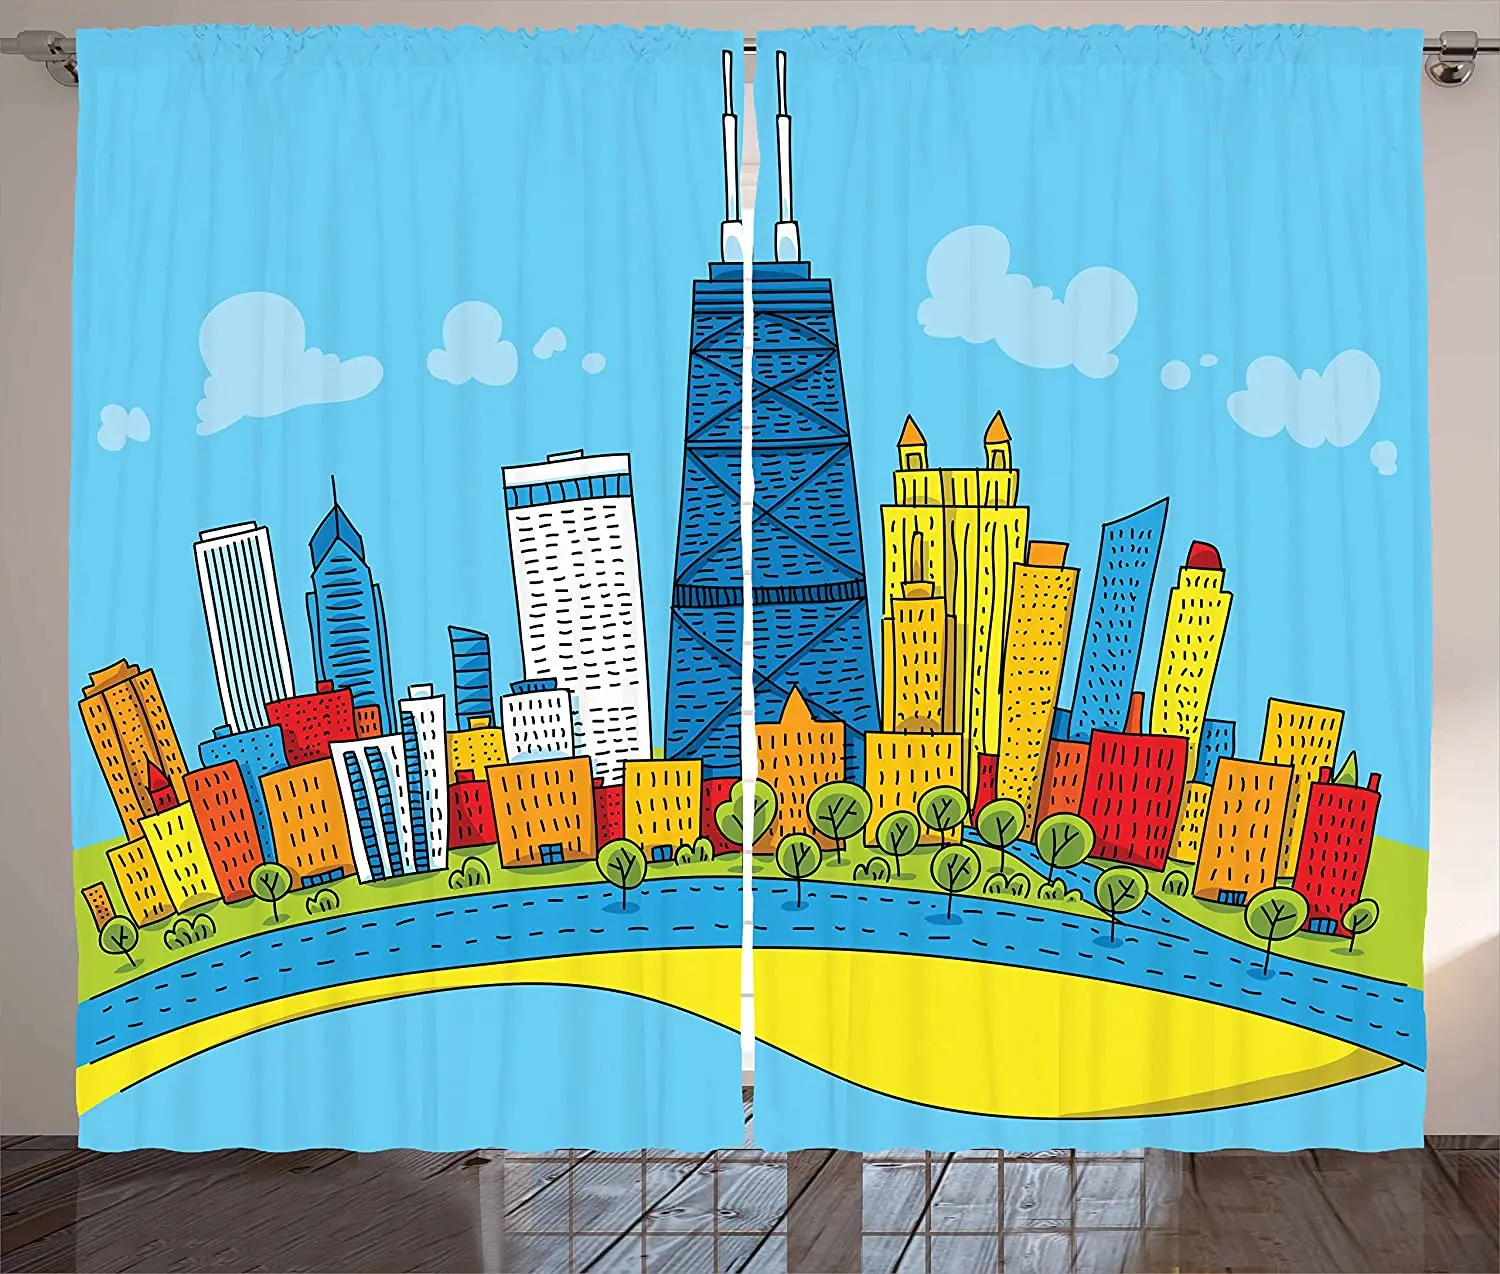 

Chicago Skyline Blackout Curtains Cute Cartoon Style Childish City View with Colorful Buildings Caricature Window Curtain